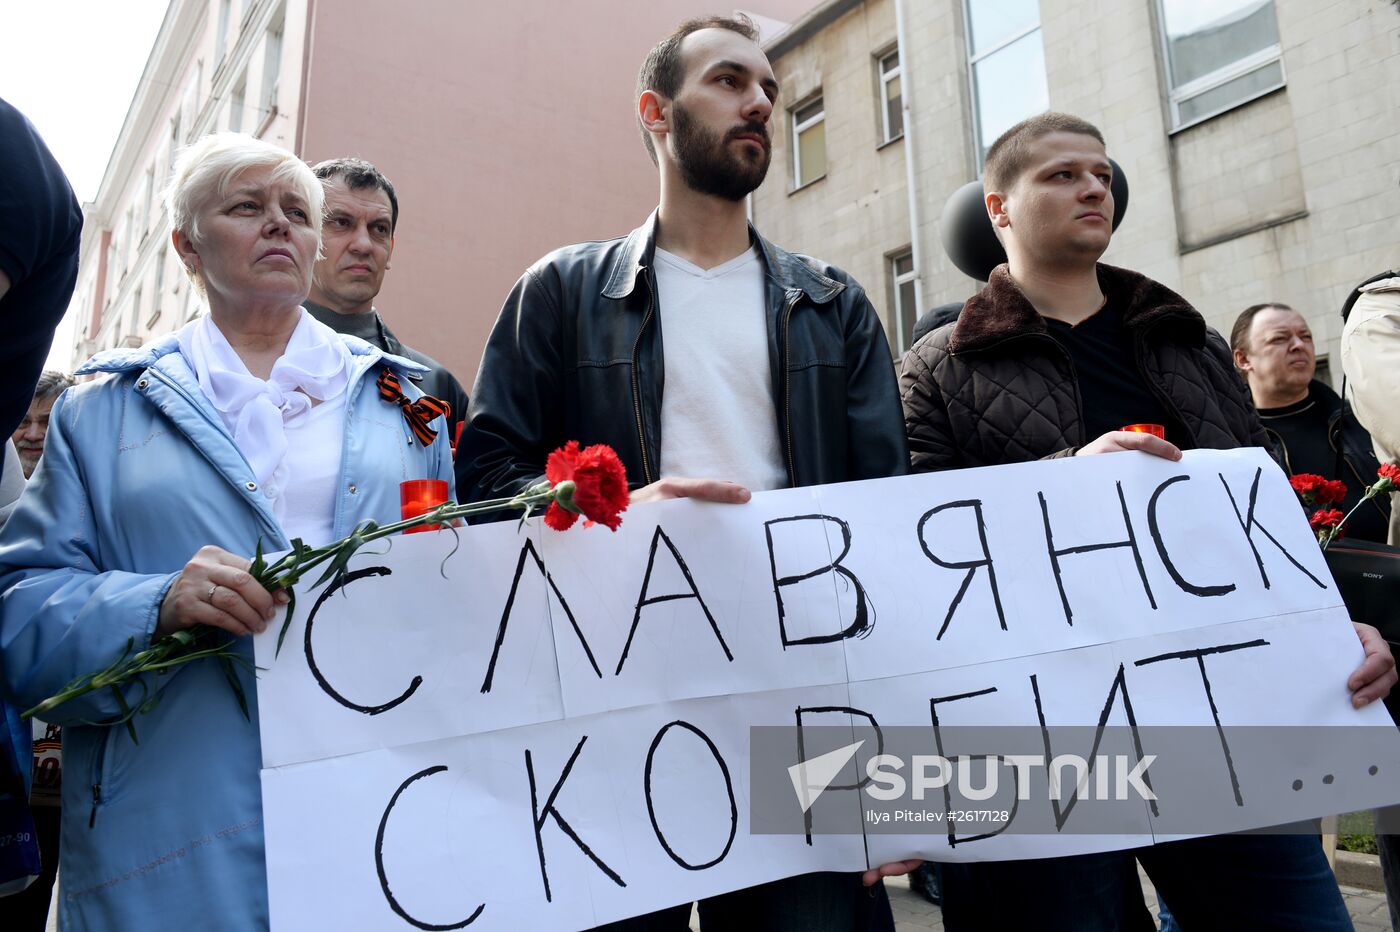 Rally held to commemorate those killed in Odessa on May 2, 2014